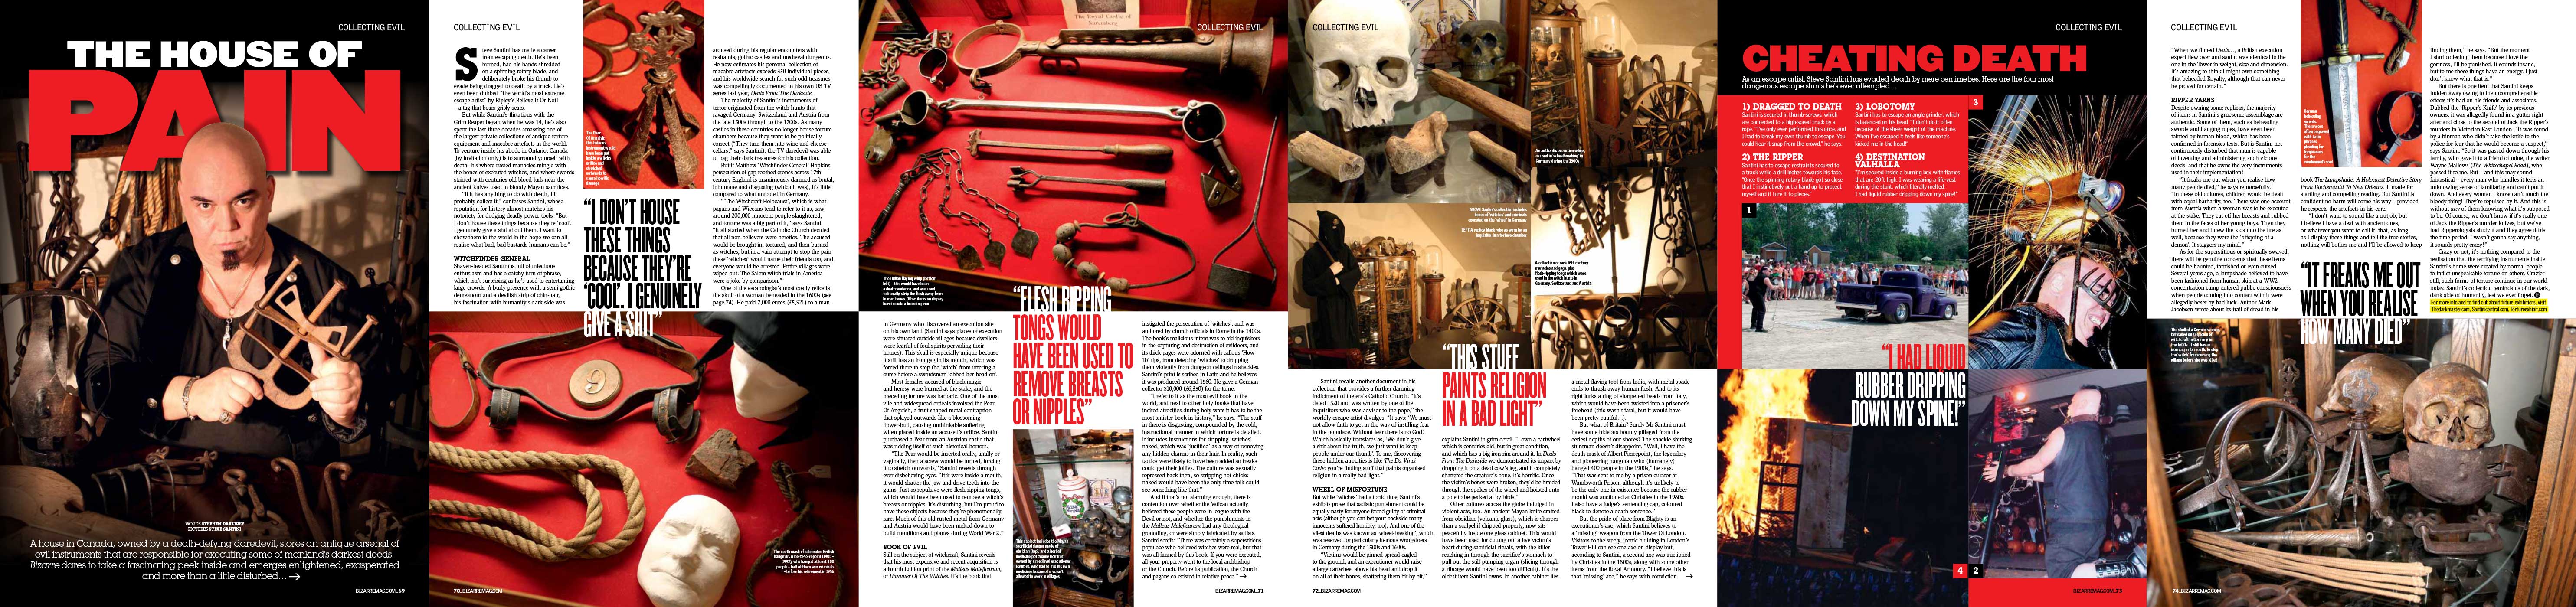 World’s largest private torture museum — Bizarre Mag 2013